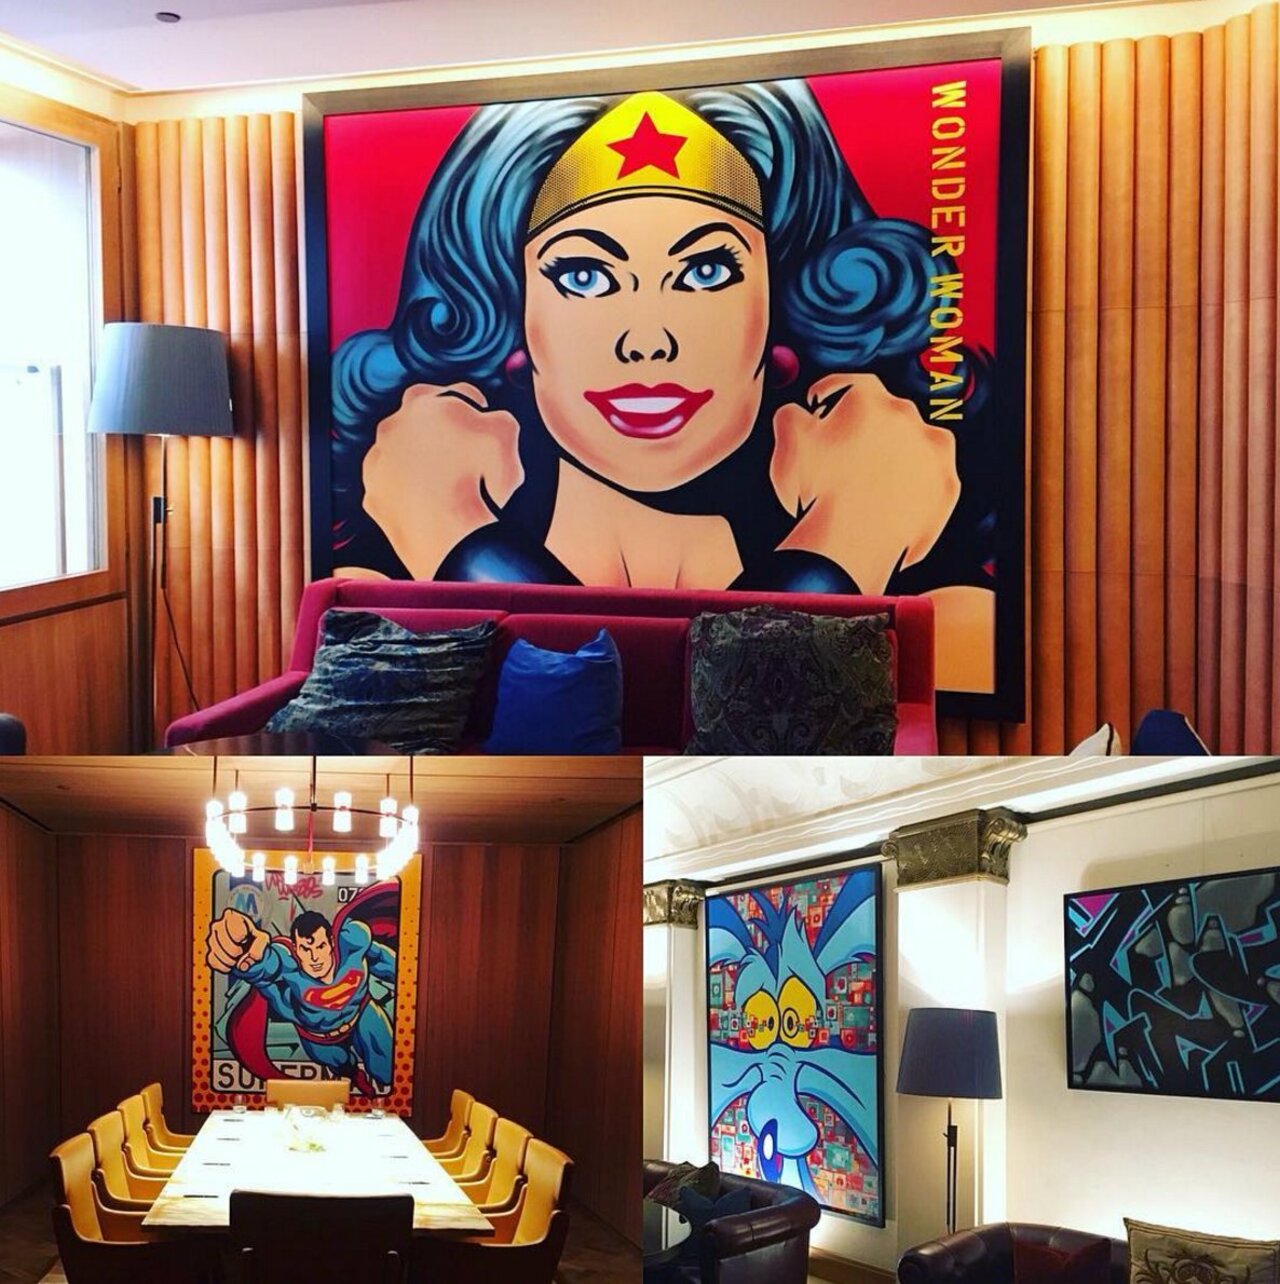 Exhibition of original works by @Richie_SEEN at @HotelCafeRoyal in #London! #operagallery #seen #graffiti #art https://t.co/ZY1JFMwoBU